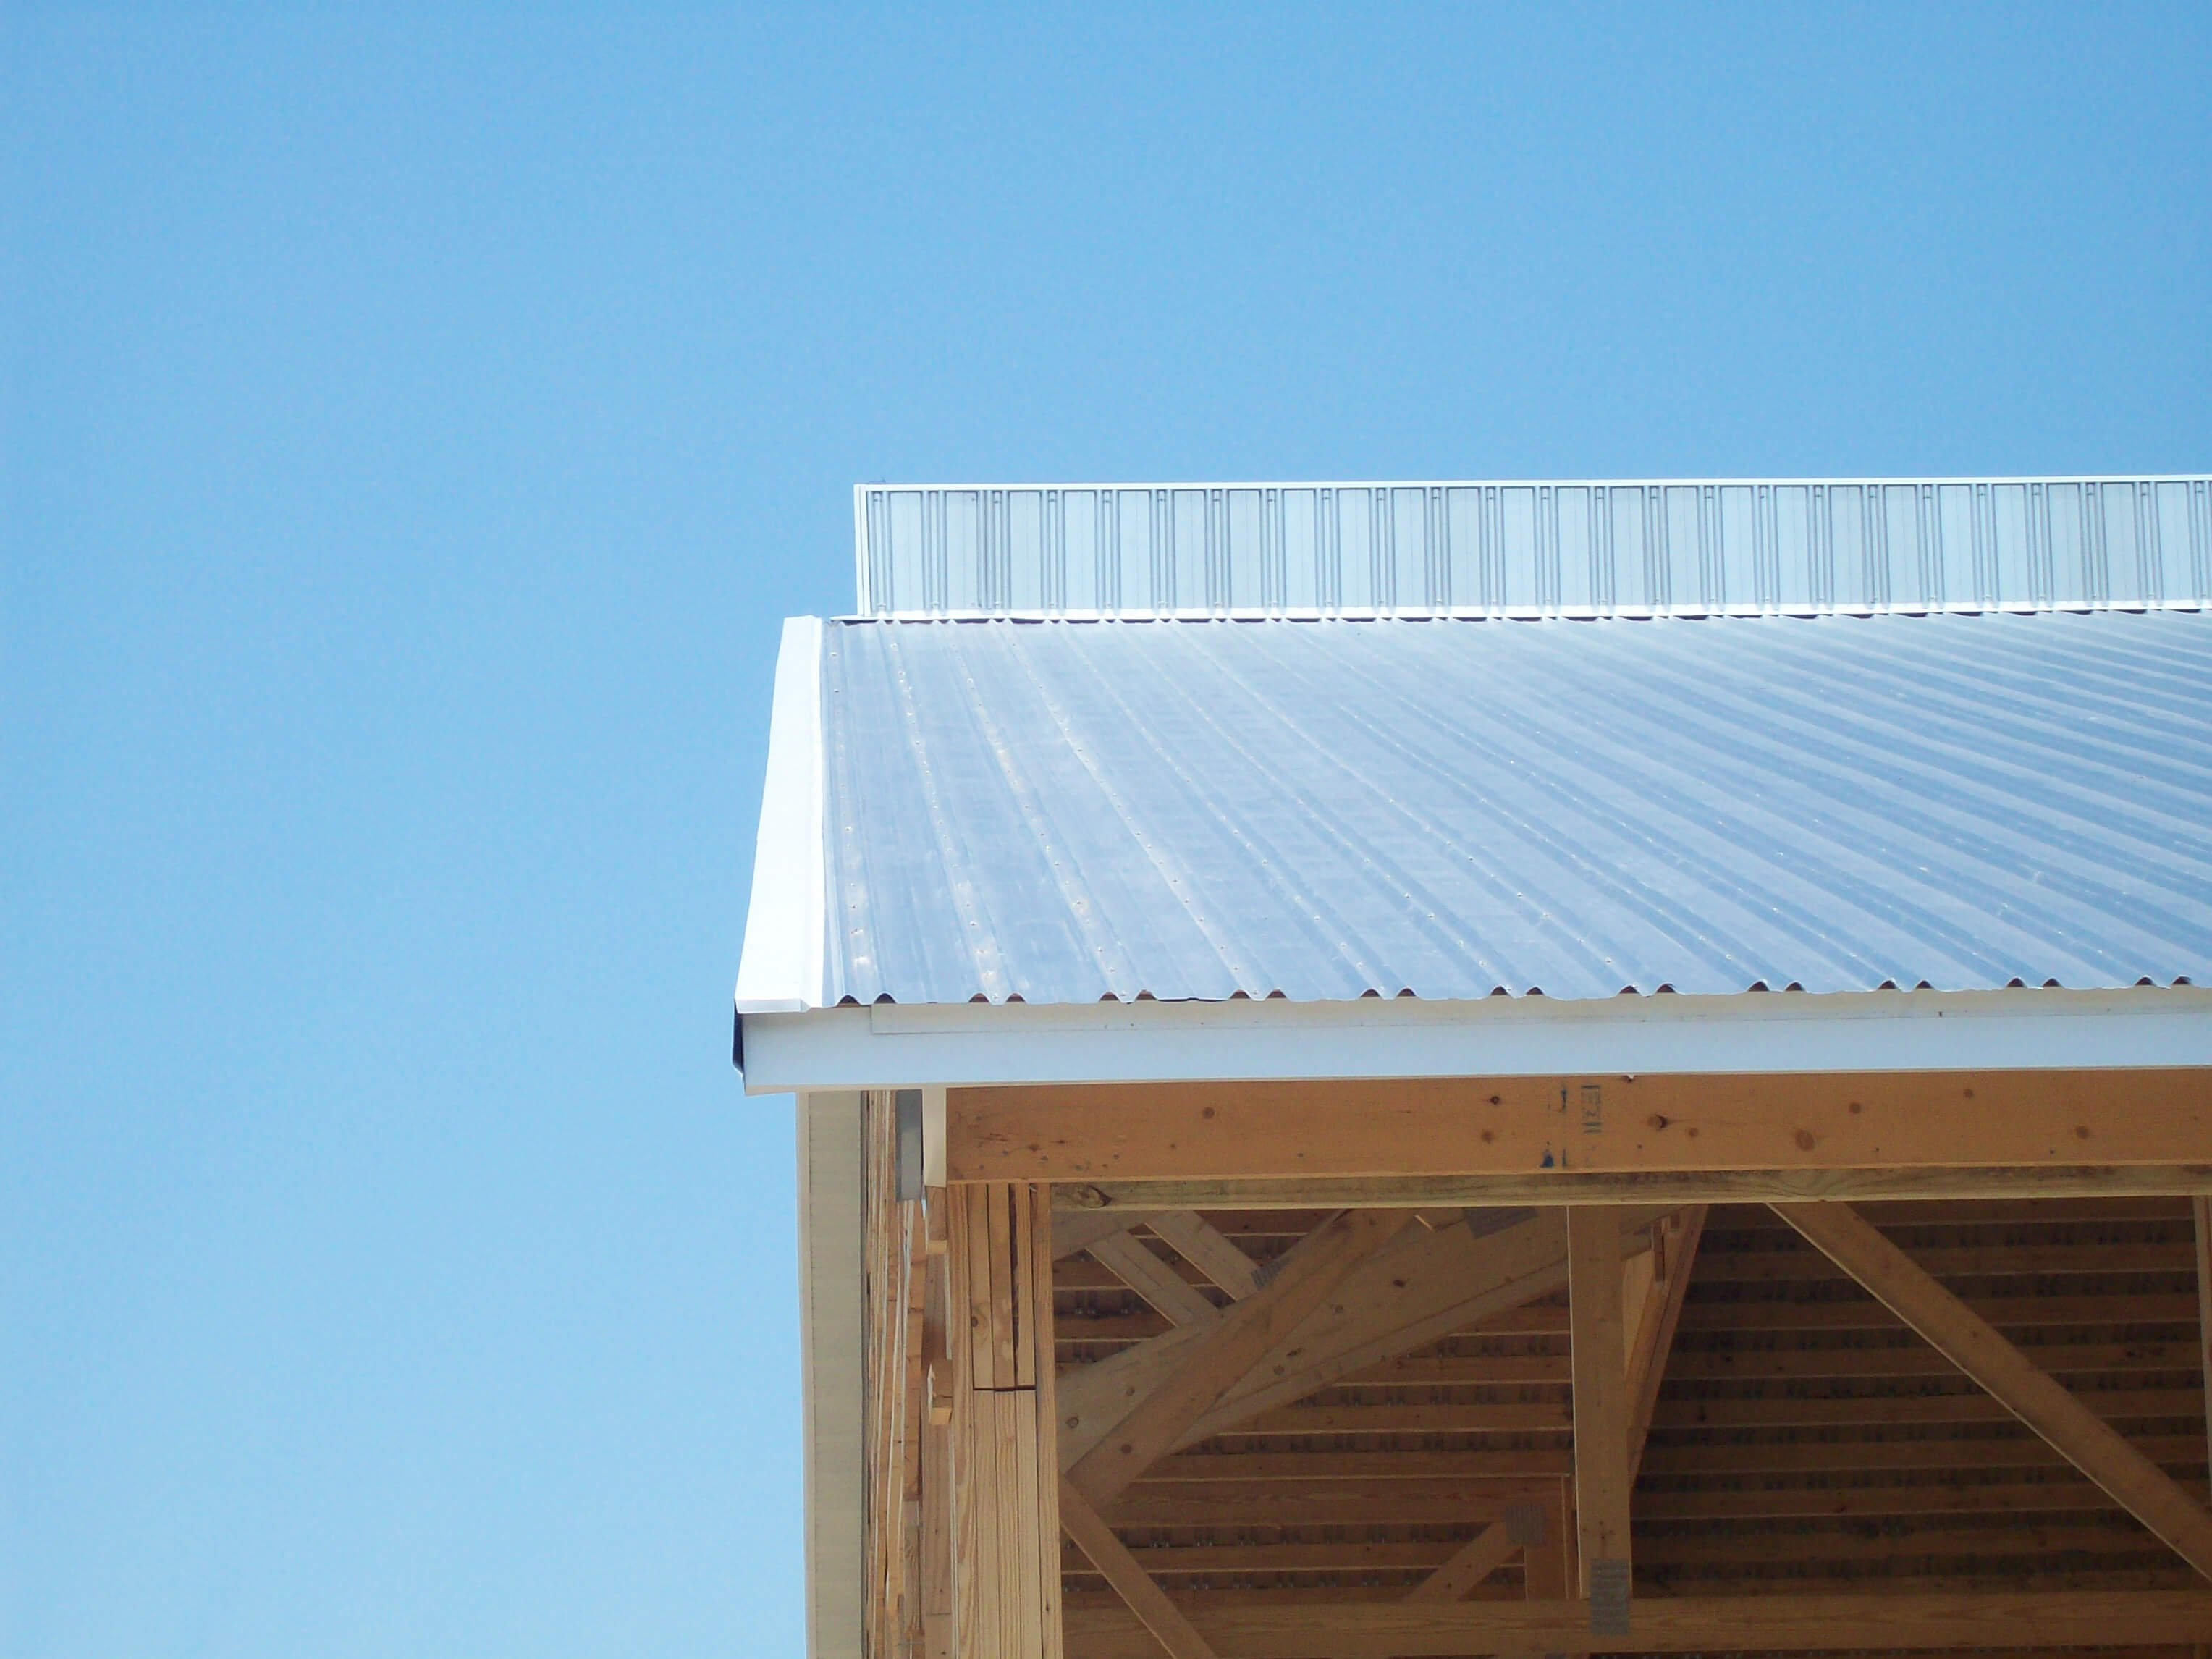 Twin Rib by Everlast Roofing